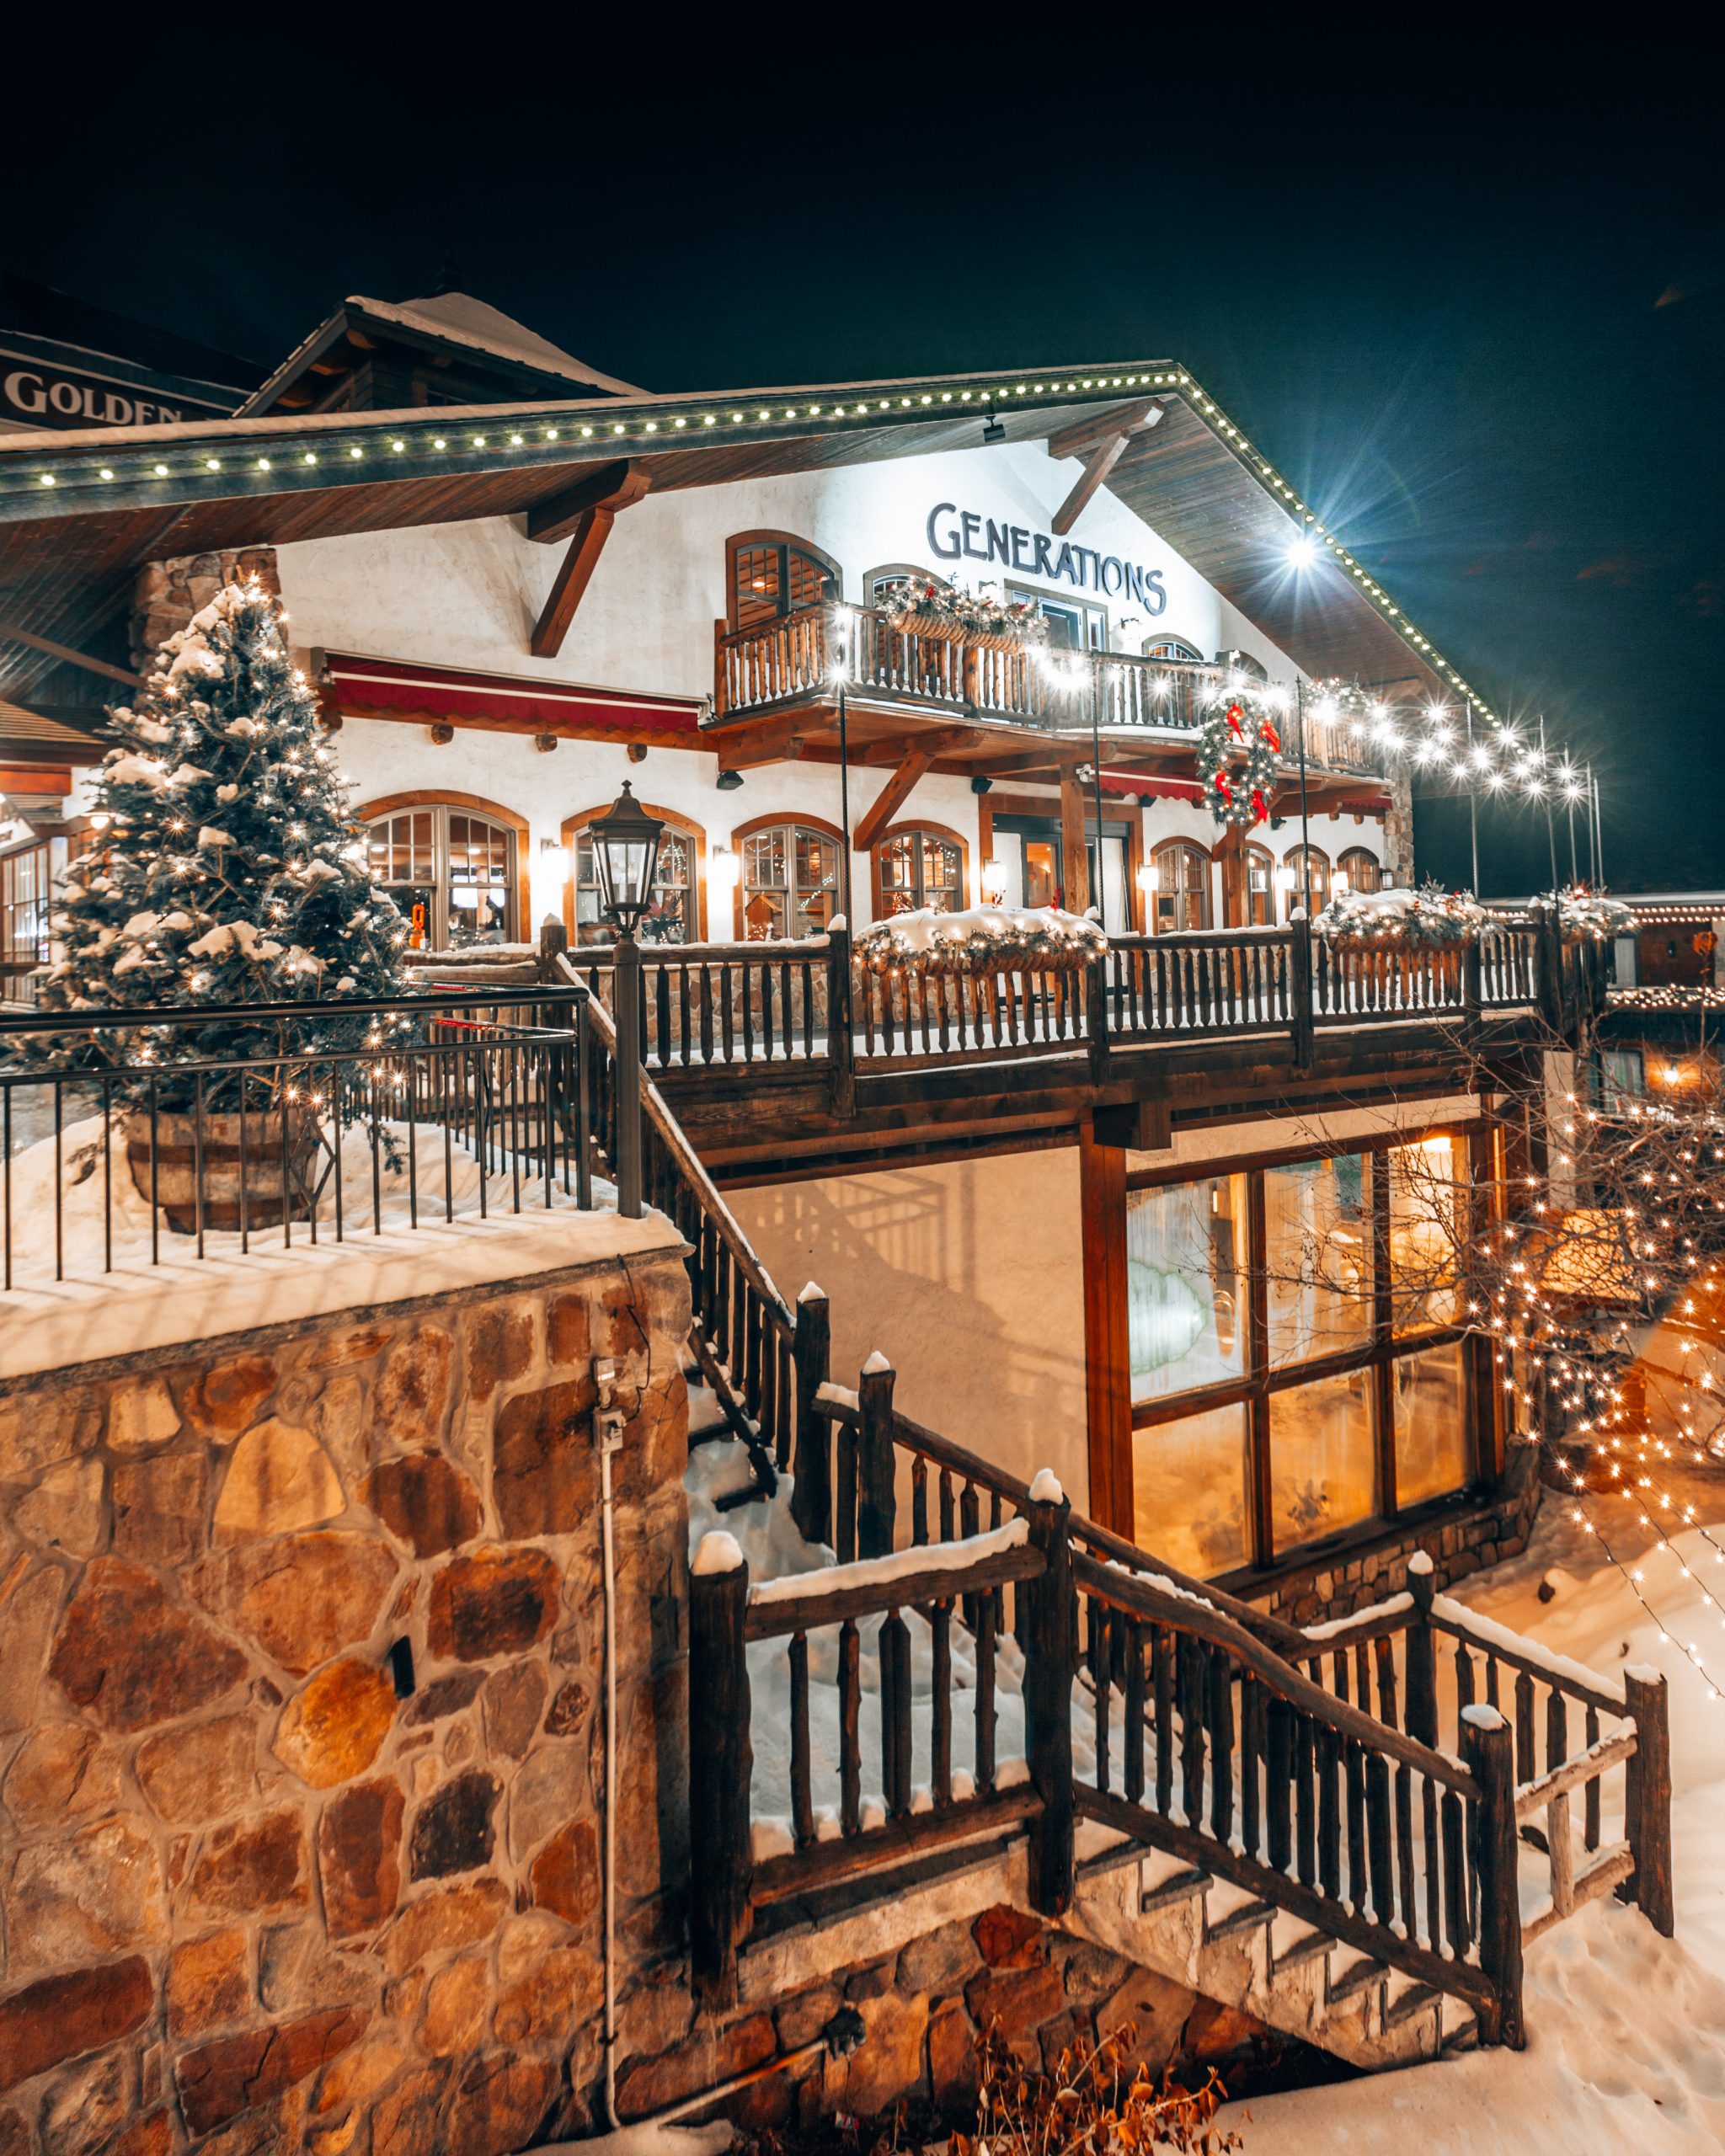 Generations restaurant in winter with Christmas lights